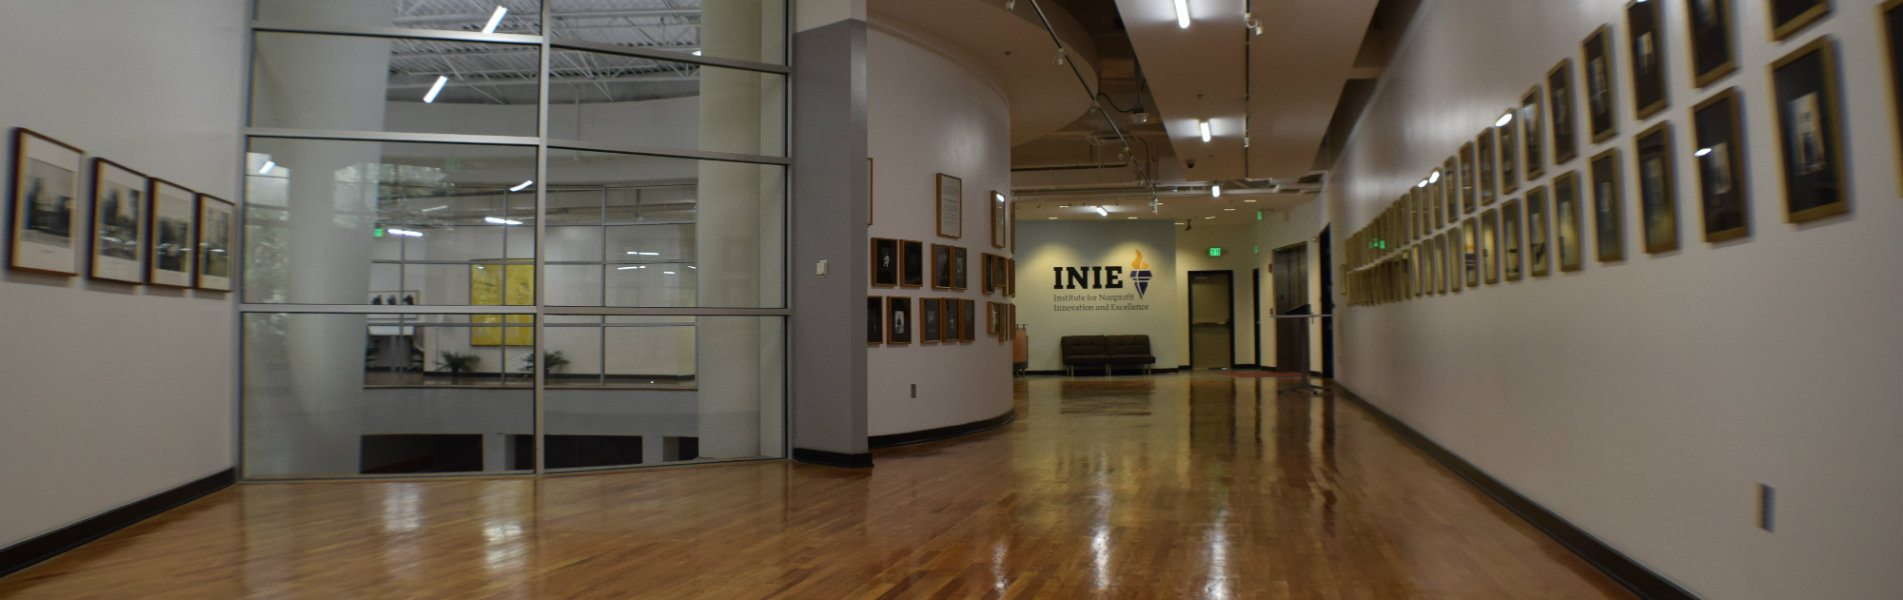 Third floor of the TCC Center for Innovation, home of the Institute for Nonprofit Innovation and Excellence